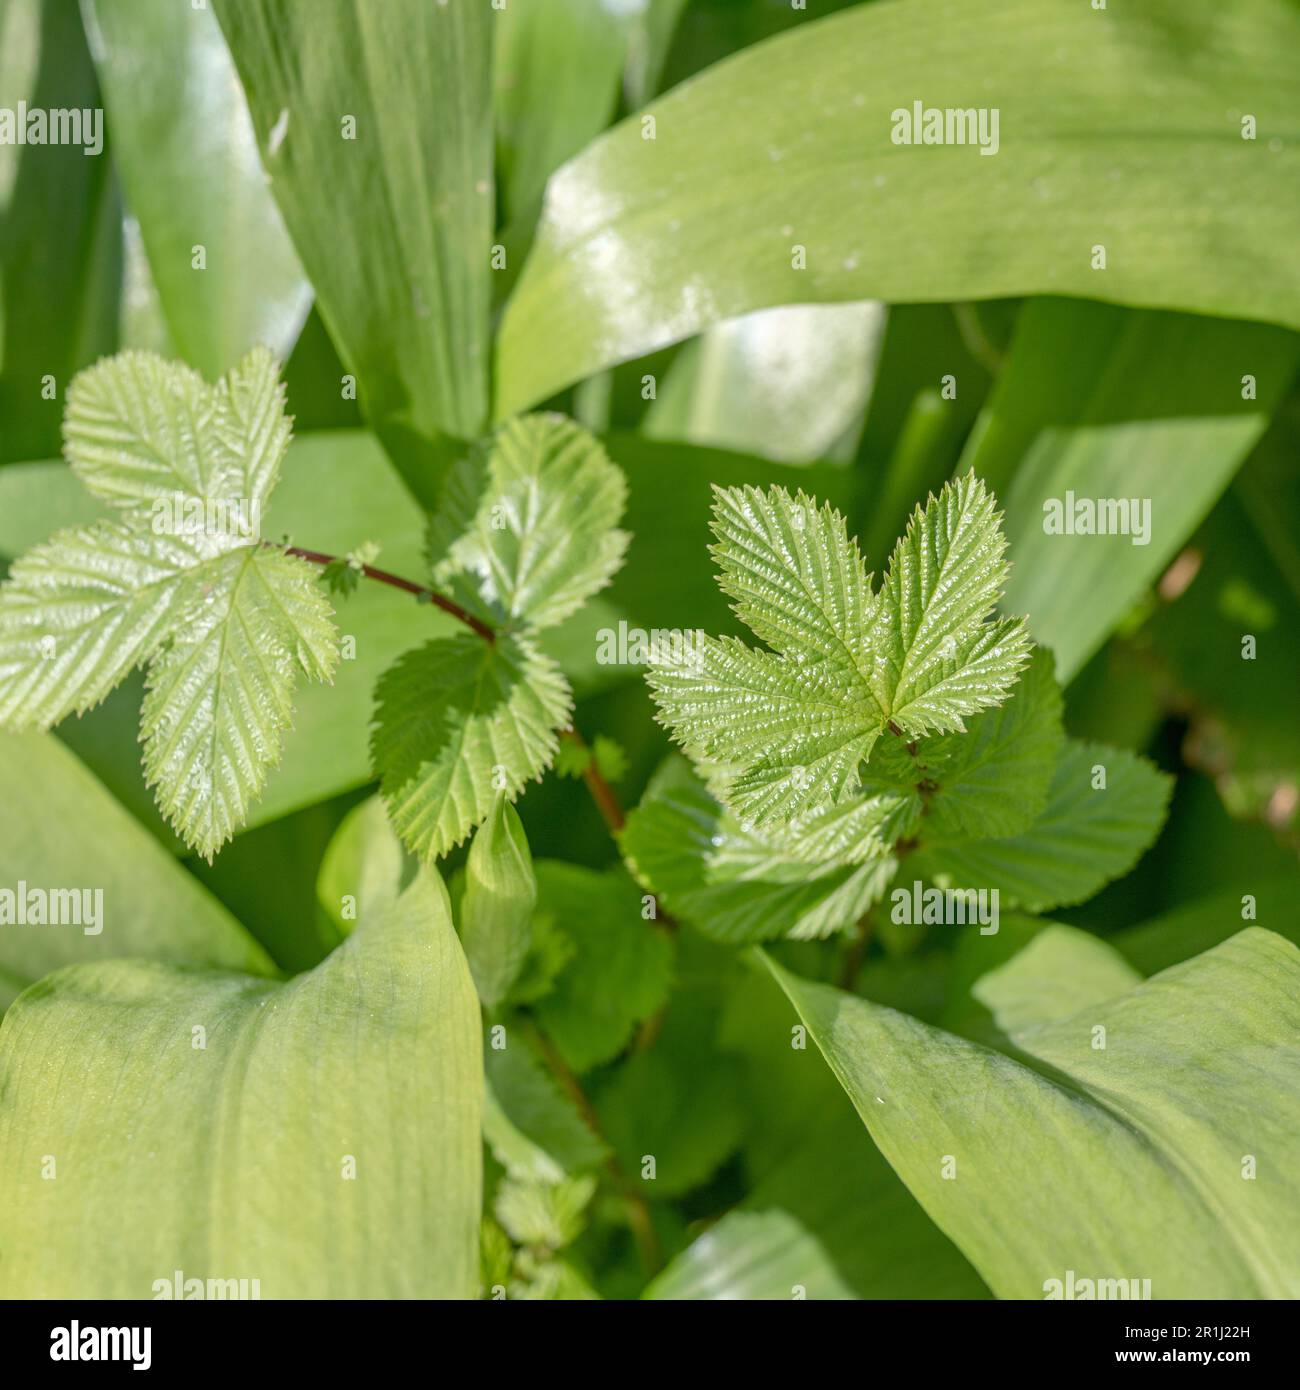 Some young leaves of Meadowsweet / Filipendula ulmaria (central picture). Surrounding leaves belong to wild garlic. M/sweet once used in herbal cures. Stock Photo